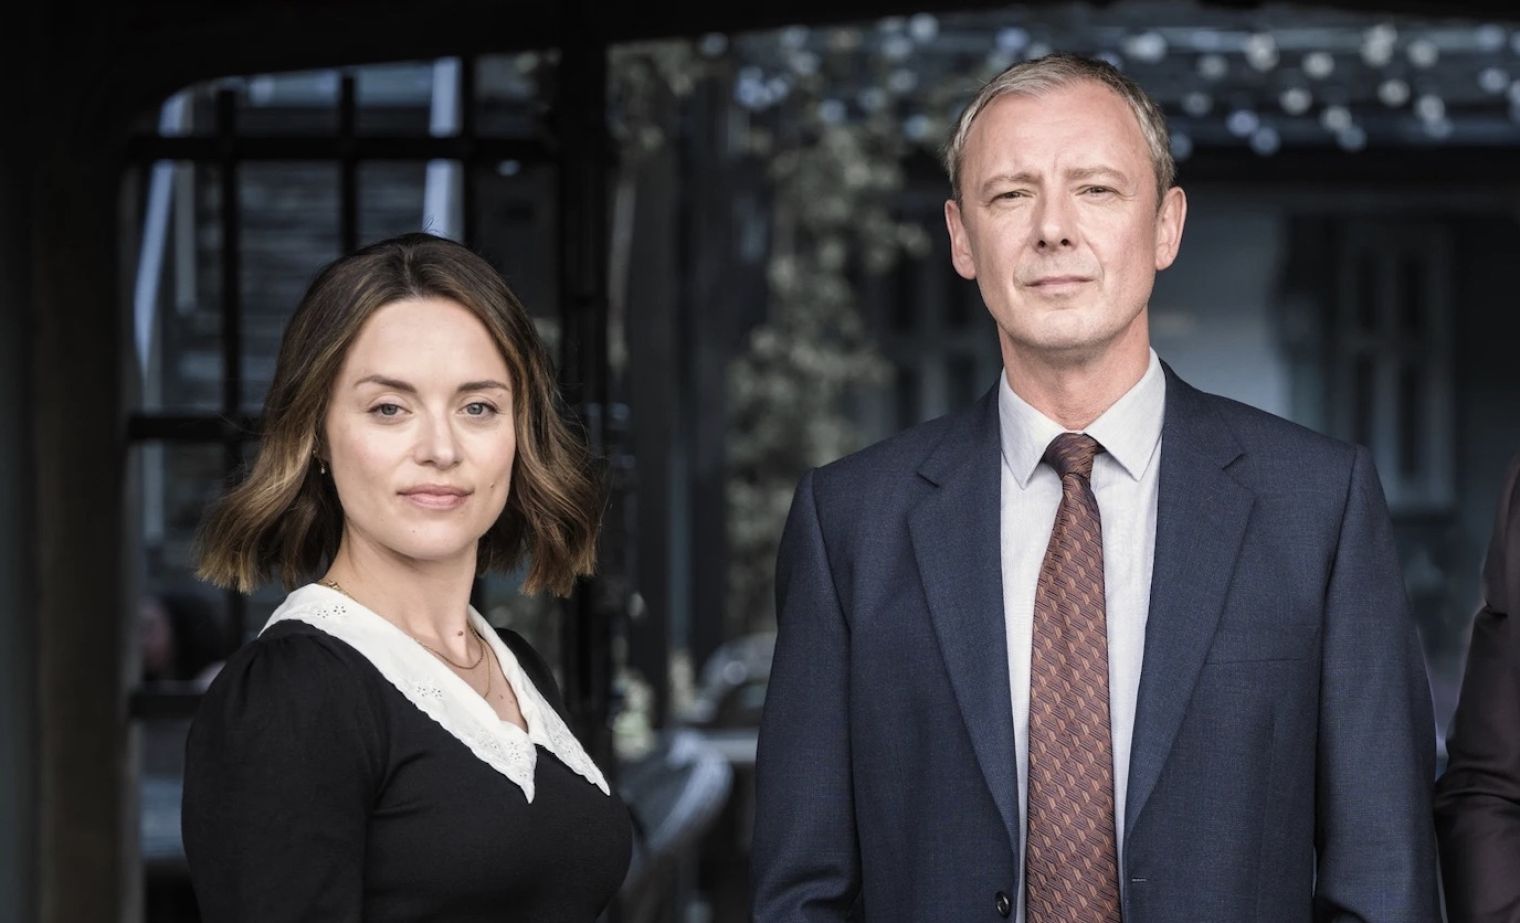 John Simm will lead Alibi’s brand new crime thriller series ‘I Jack Wright’ which has just started filming